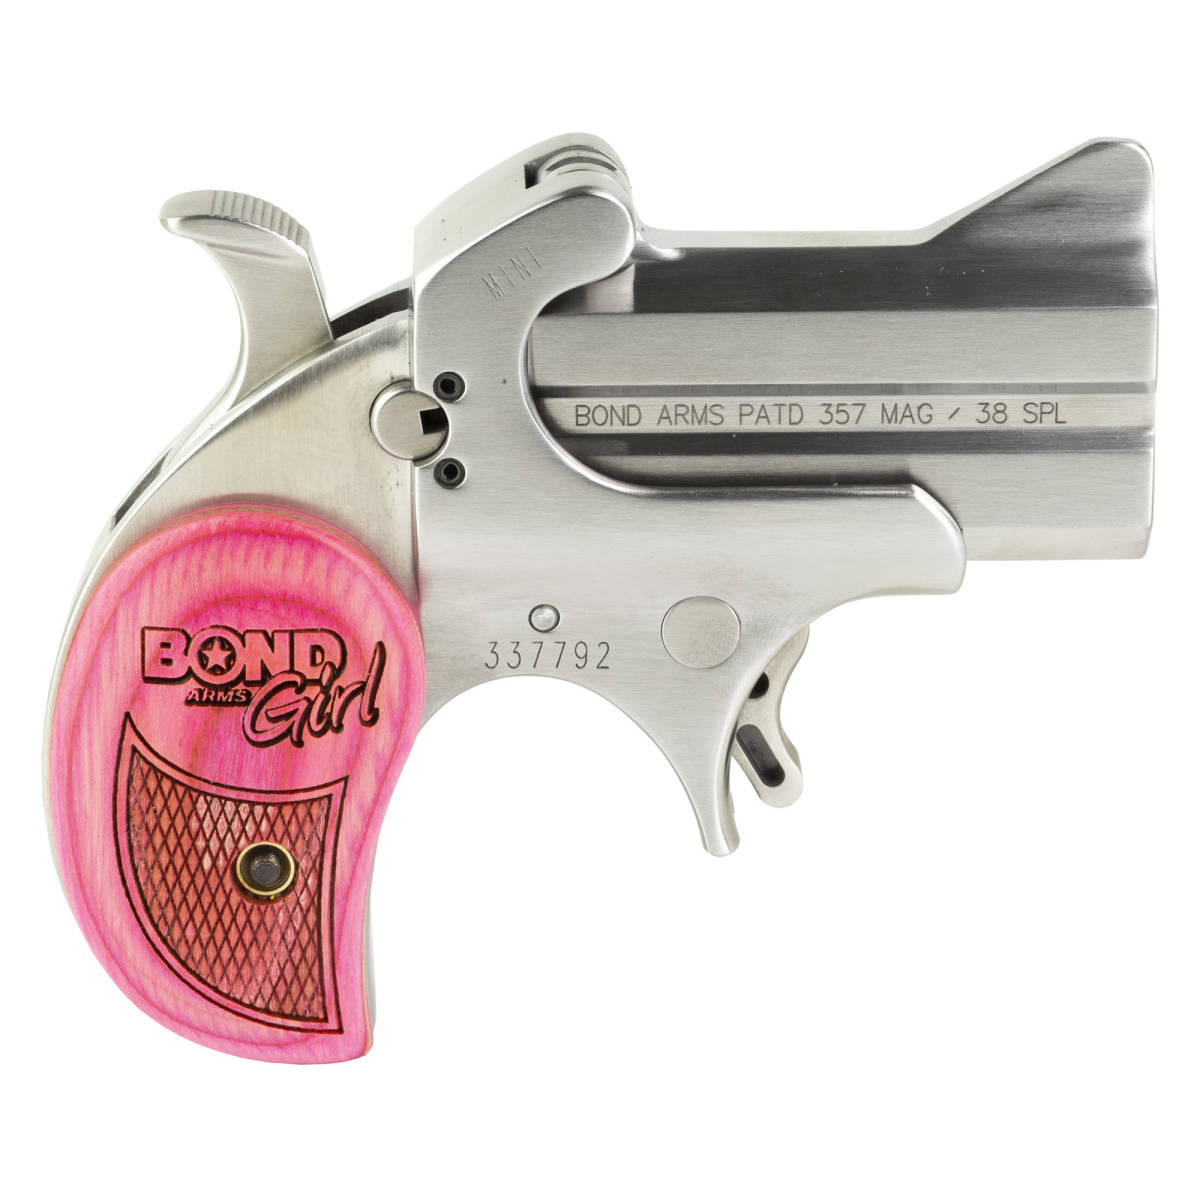 Bond Arms BAM Mini Girl 357 Mag/38 Sp 2rd 2.50” Stainless Steel Double-img-1